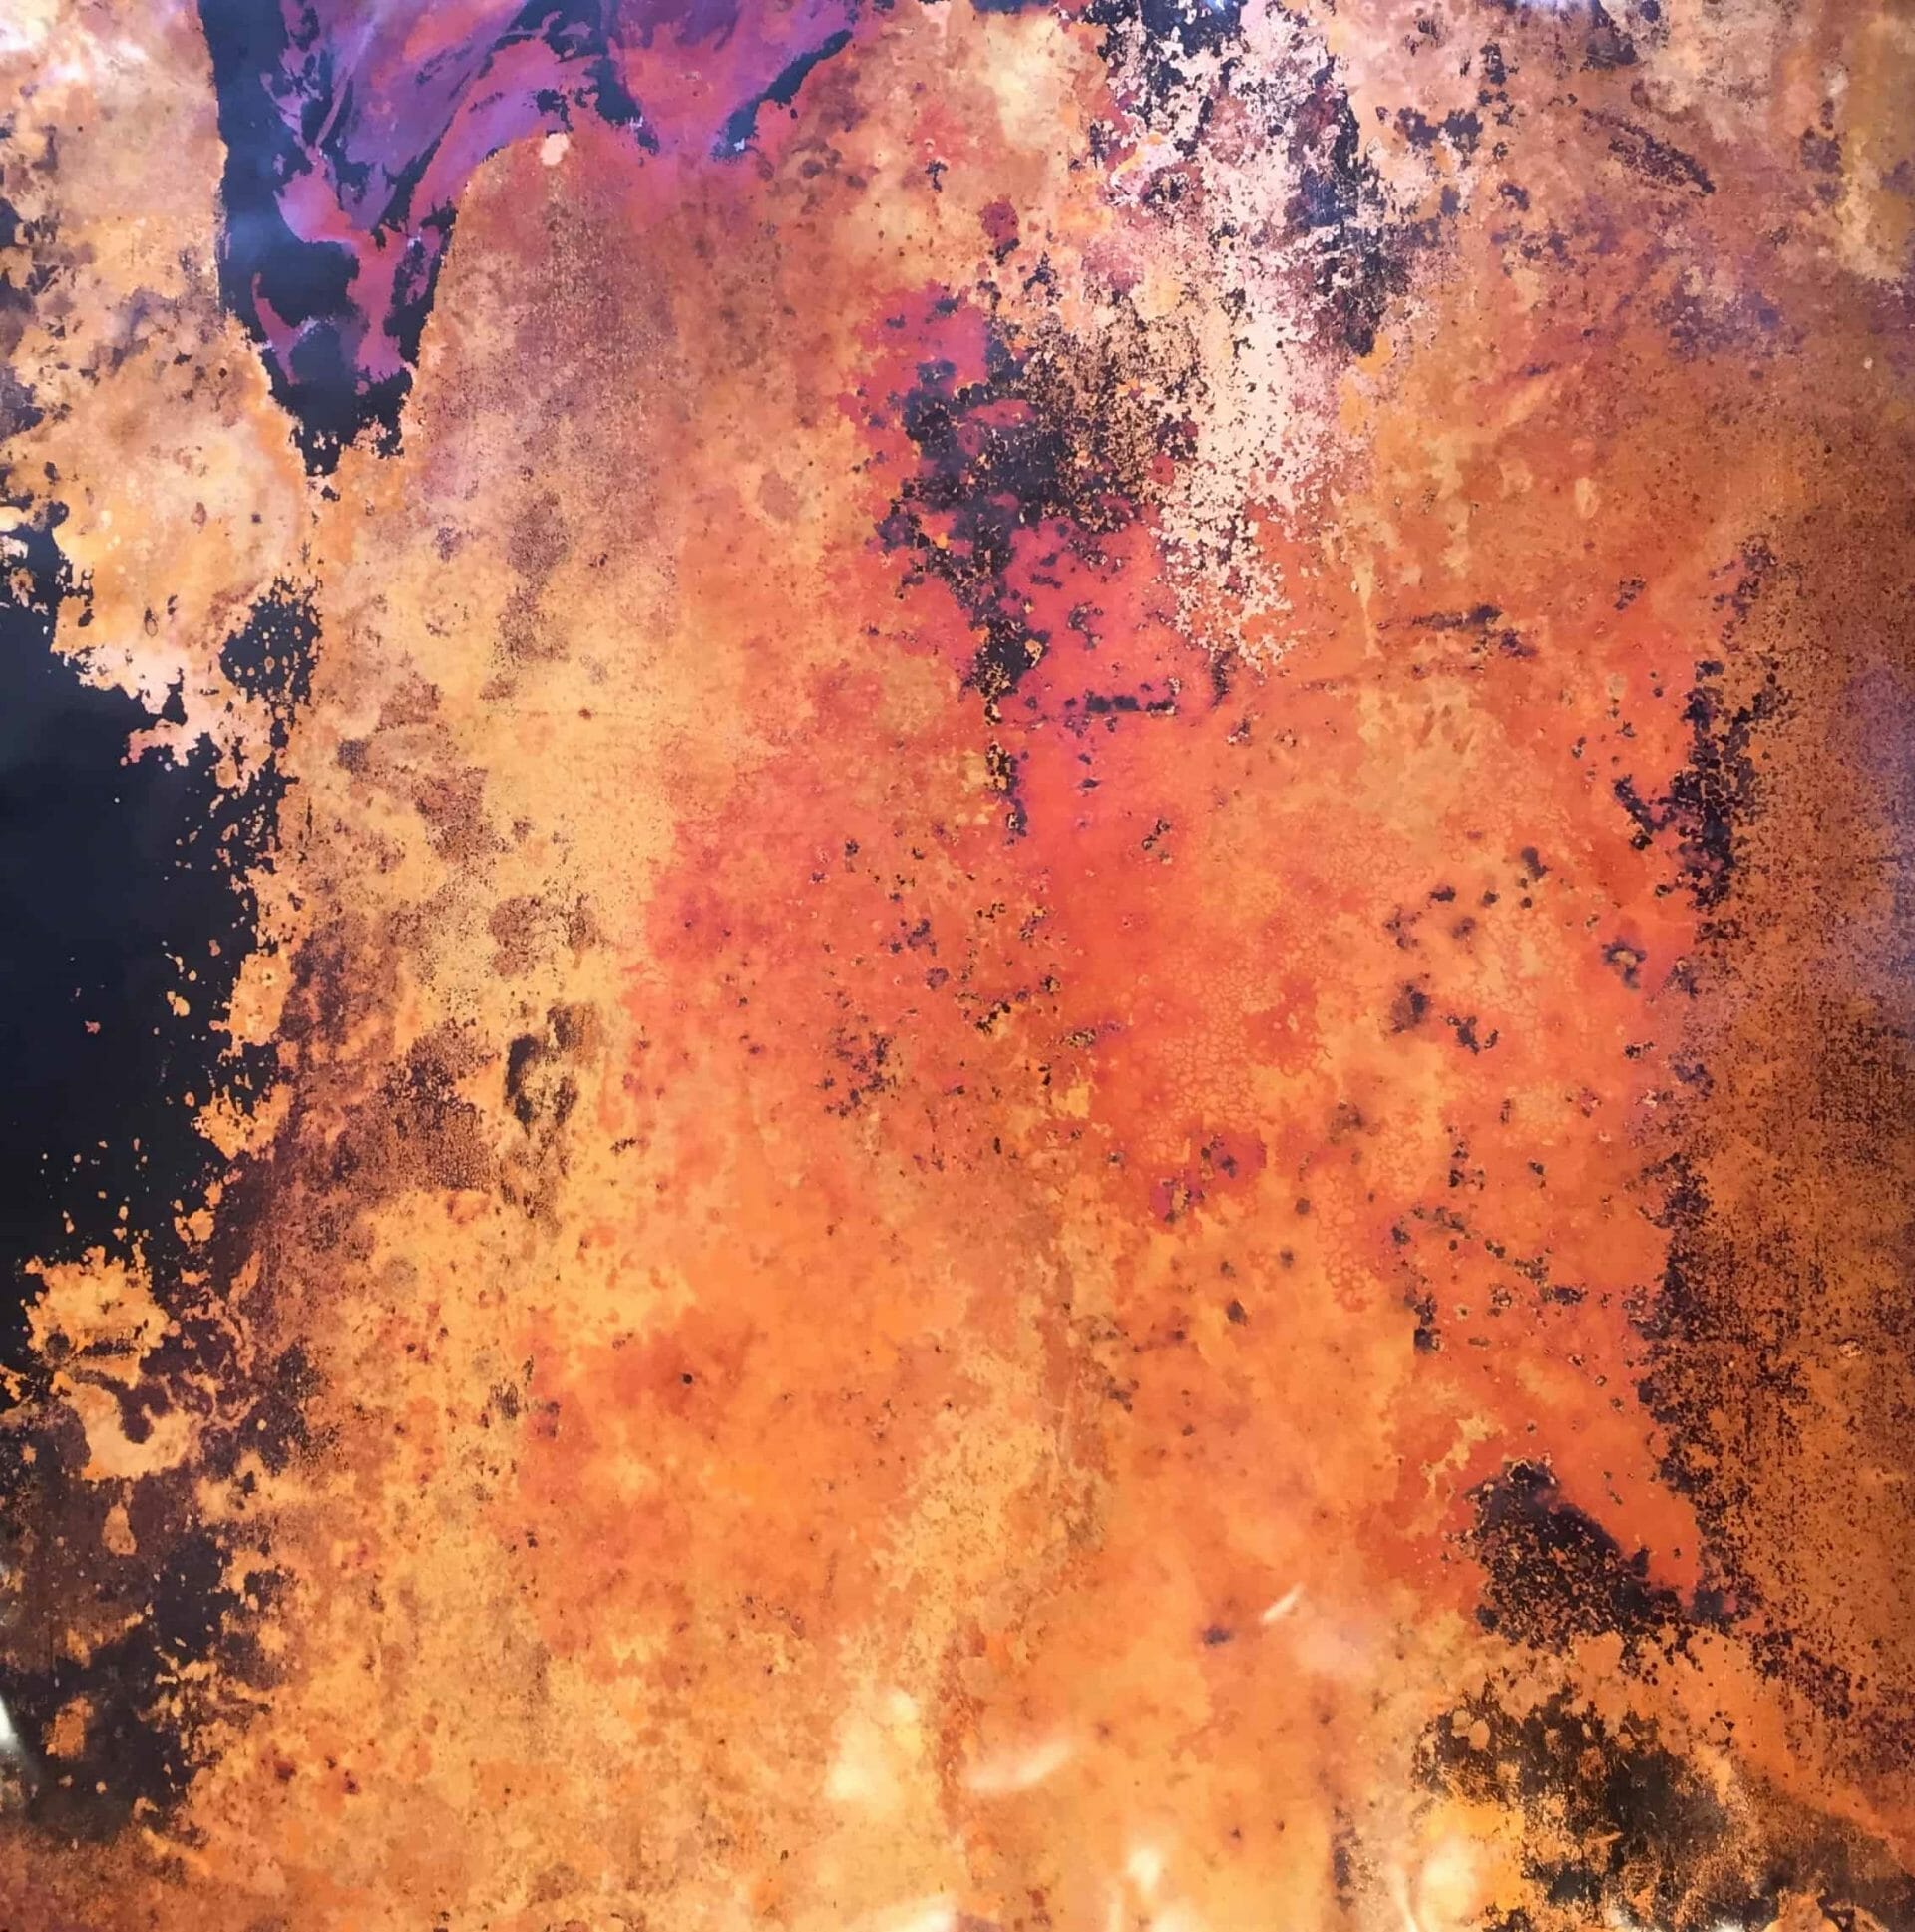 Copper Abstraction II - Canadian Original Artwork For Sale by Rosanna Marmont - Okotoks, AB Local Artist - Abstract Art - Mounted Copper